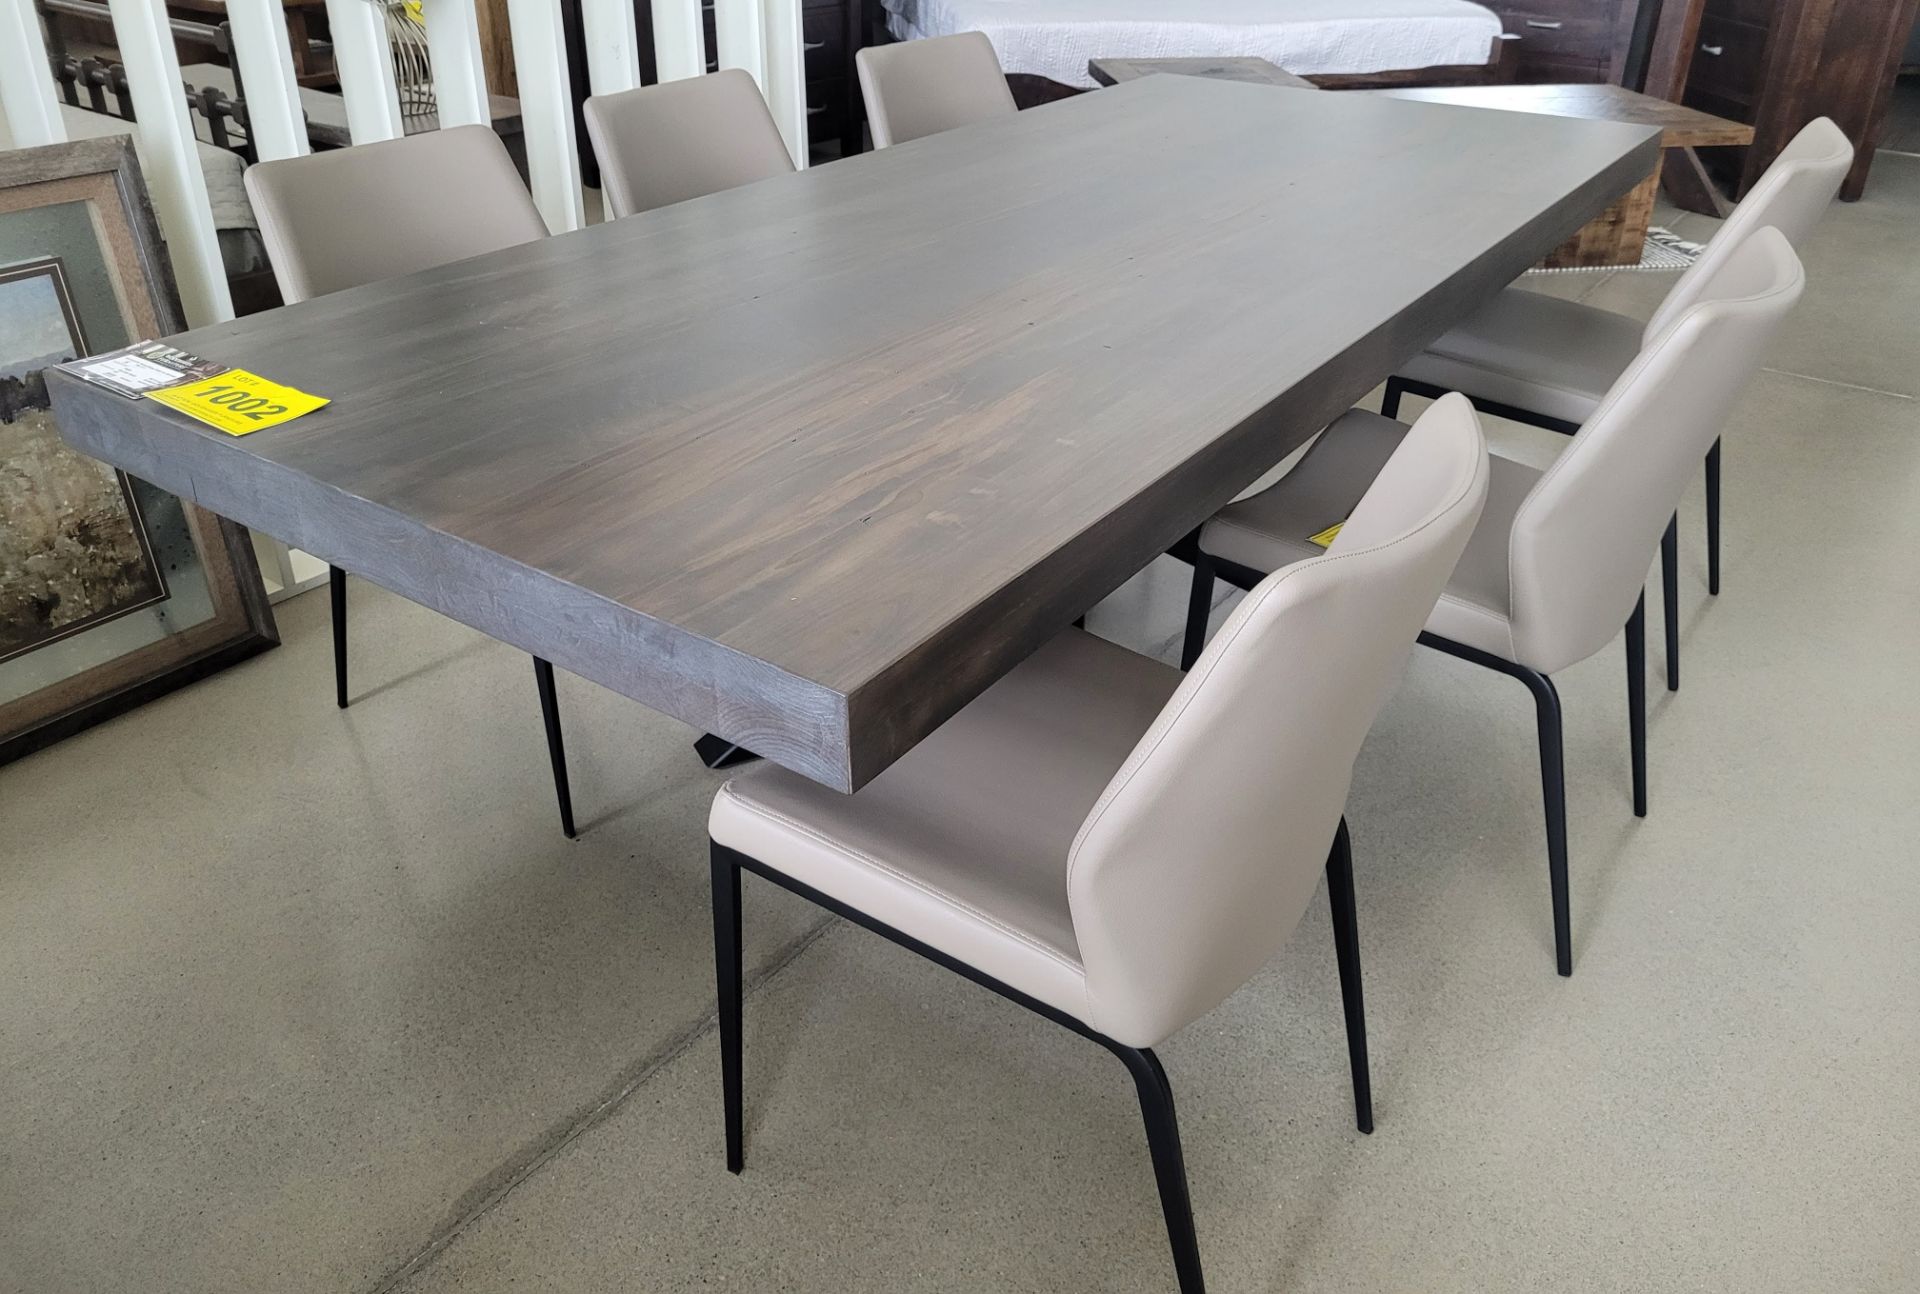 NEXUS DINING TABLE 42" X 96" SOLID TOP, STAIN: MOCHA SILK - MSRP $8,712.00 - (TABLE ONLY - CHAIRS - Image 8 of 9